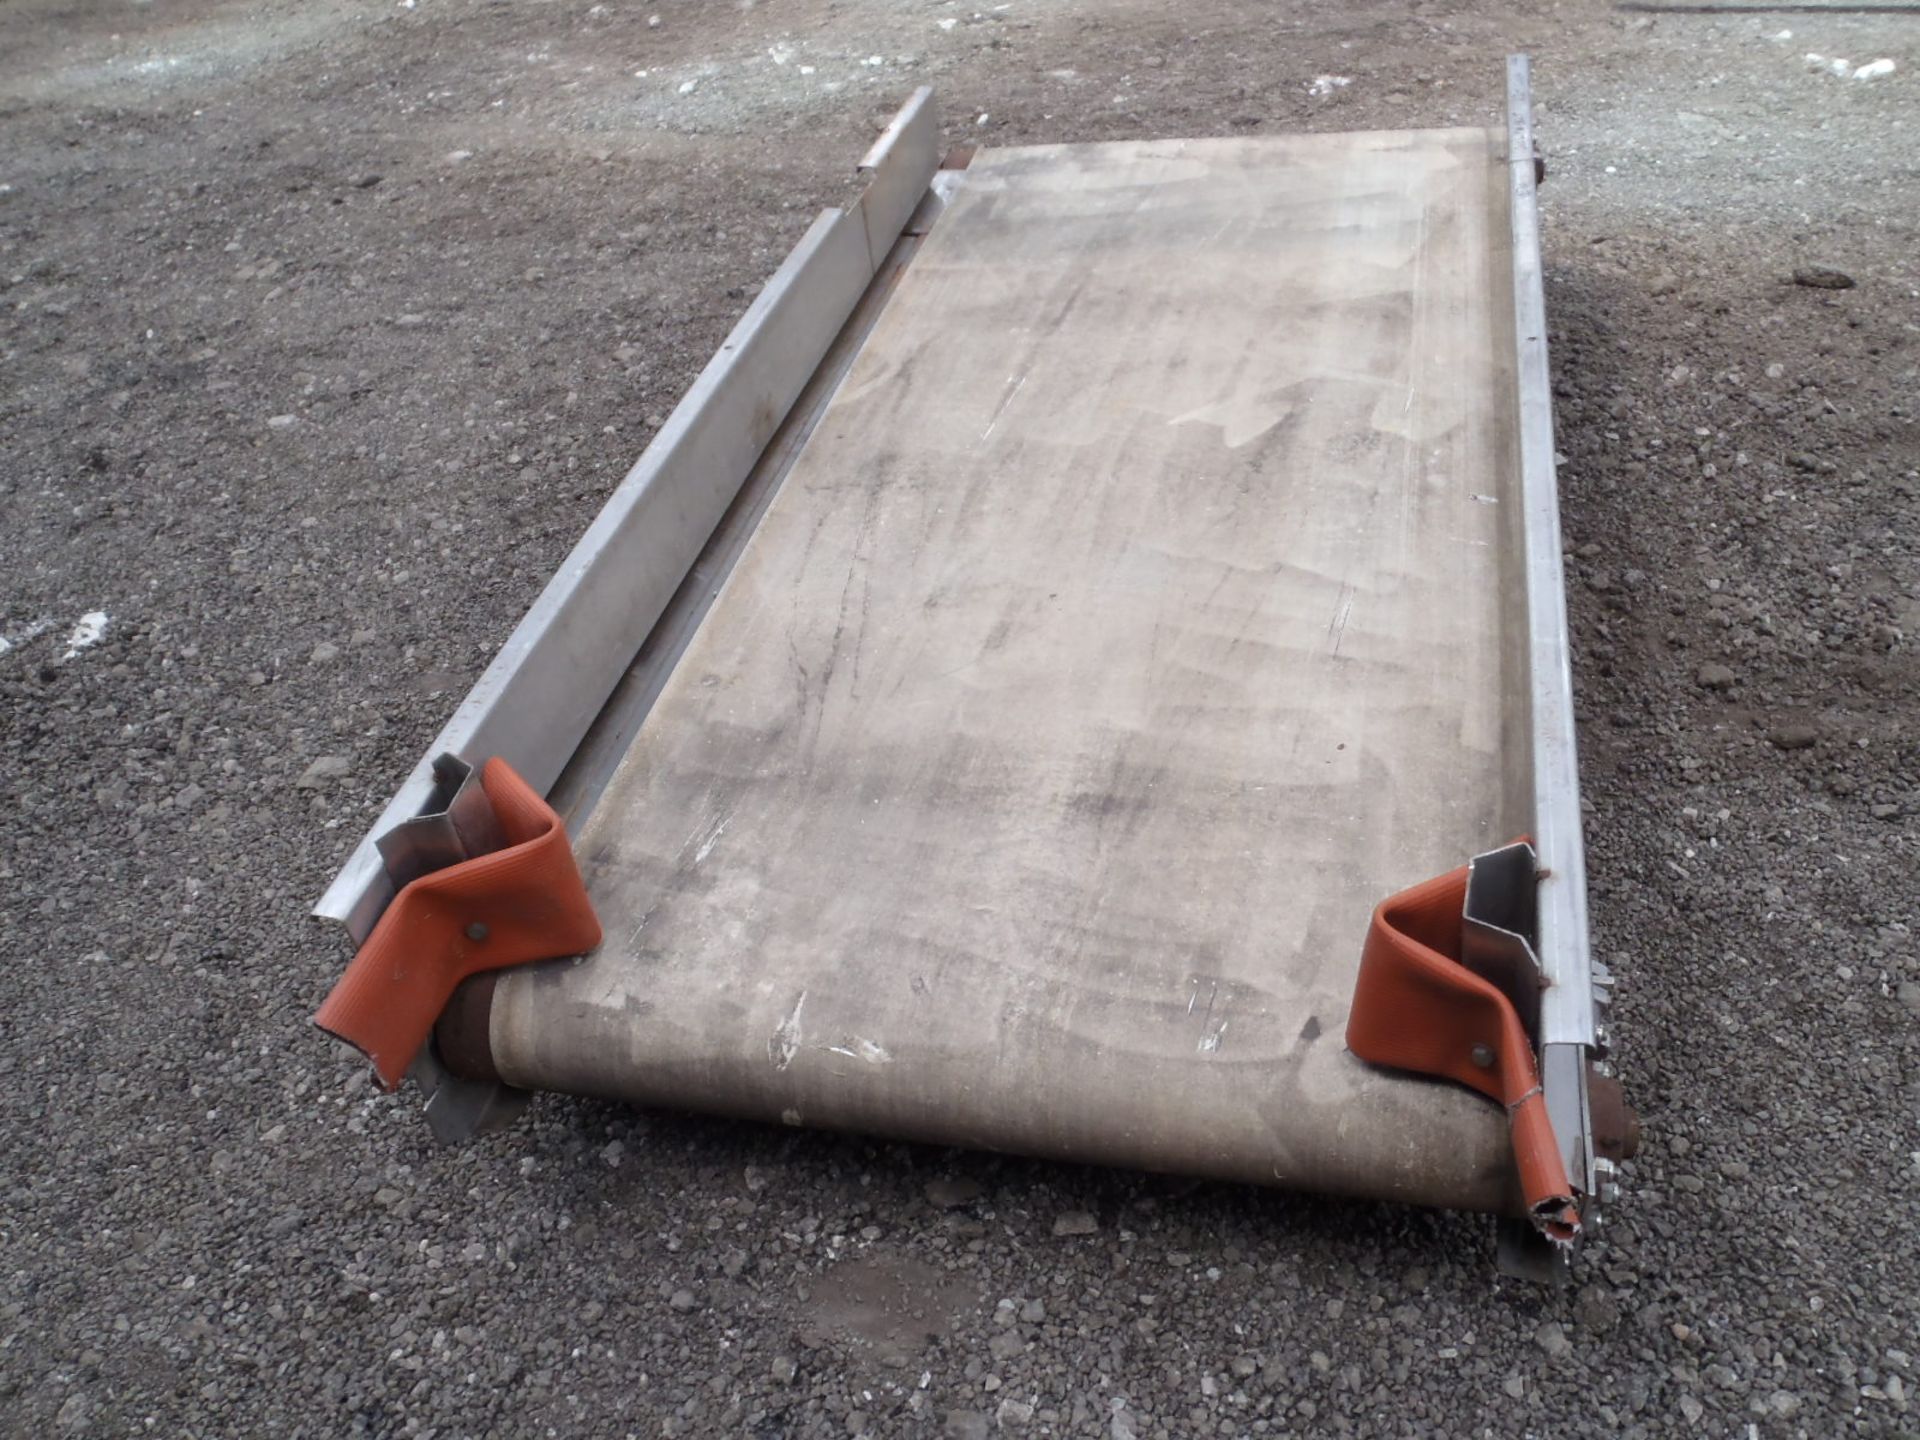 Stainless Steel Belt Conveyor, approx. 1060mm wide - Image 2 of 2